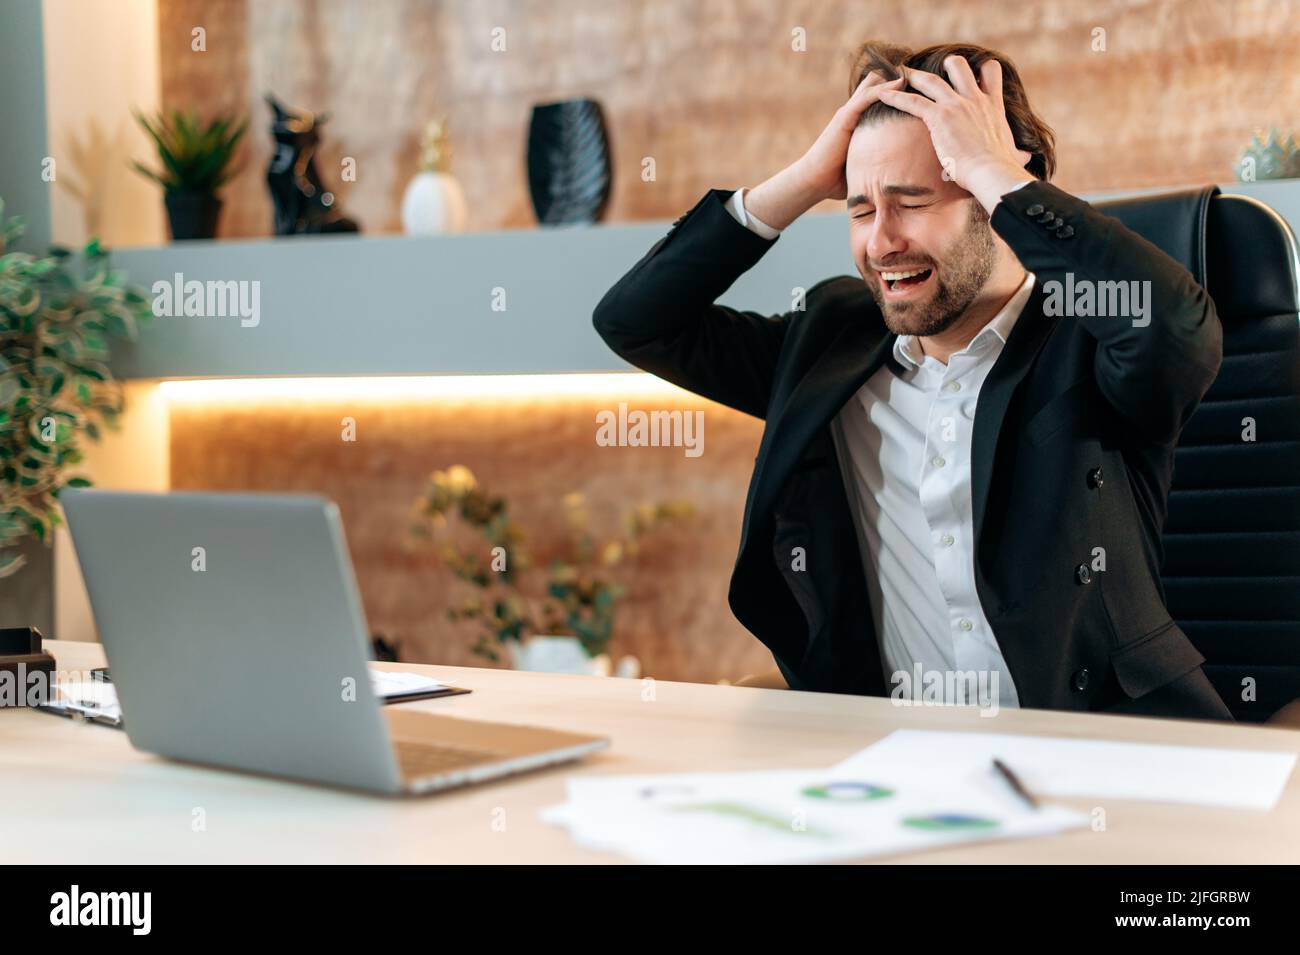 Stressed emotional caucasian businessman has problems at work, male executive, company ceo, sitting in a modern office at a desk with laptop, upset about failure, holding hands on head, annoyed Stock Photo